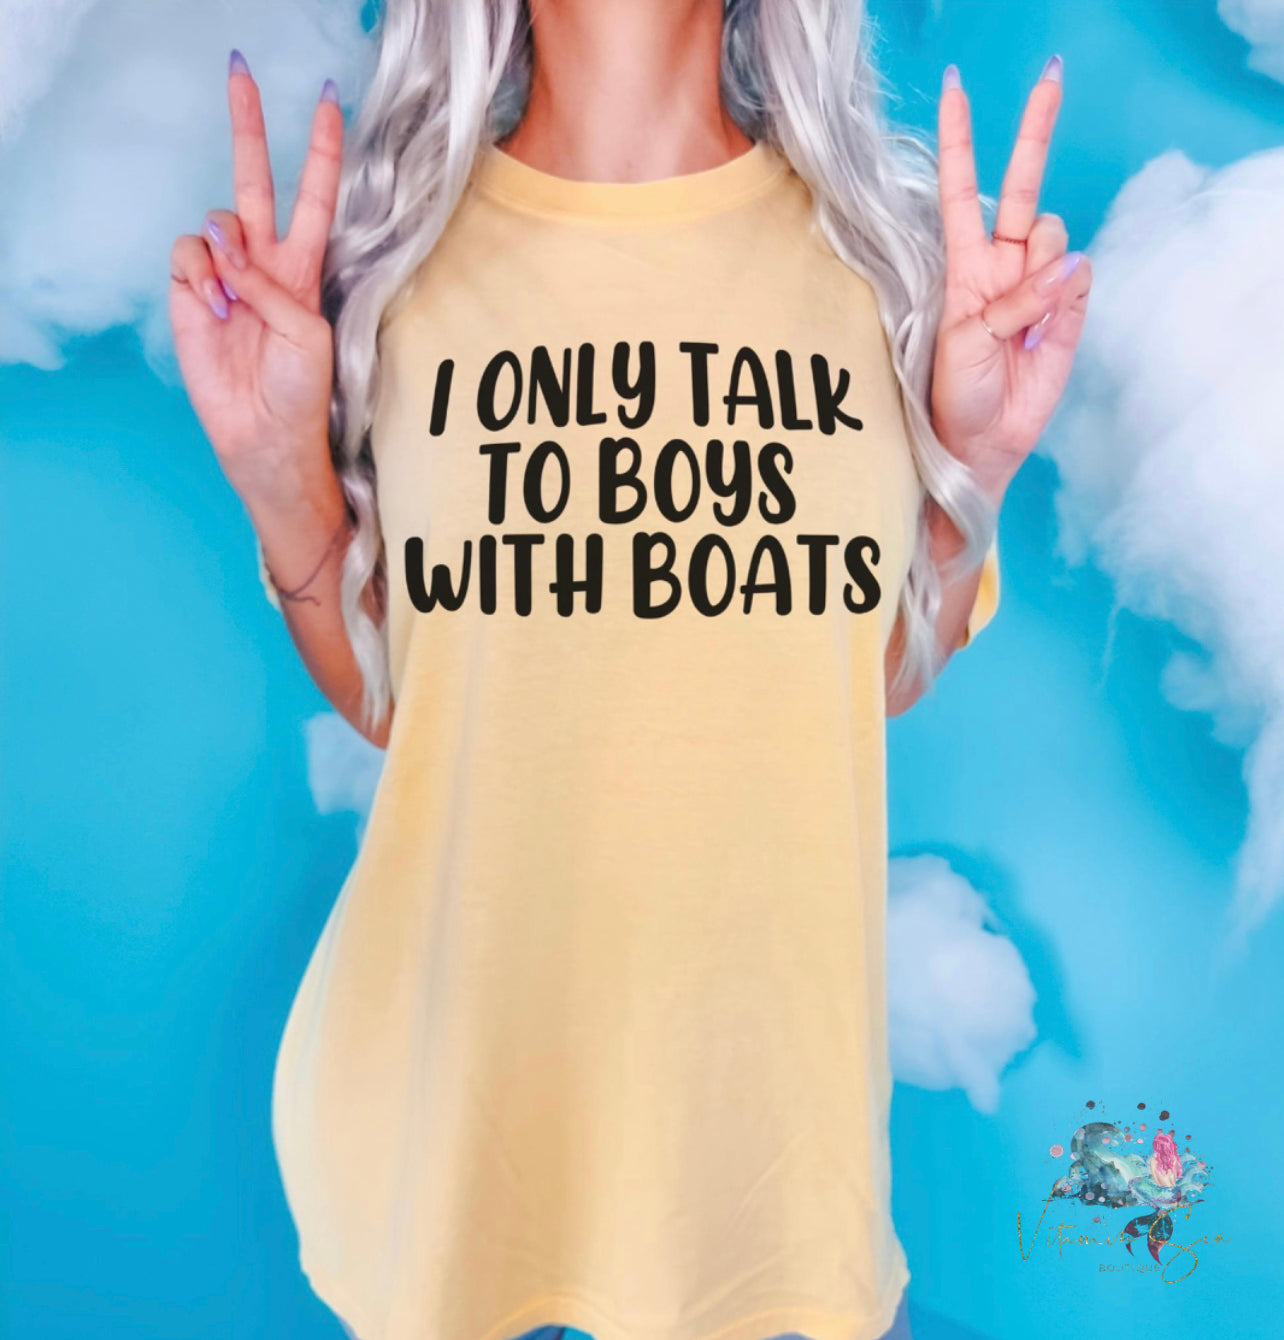 I Only Talk to Boys With Boats T-Shirt Dress